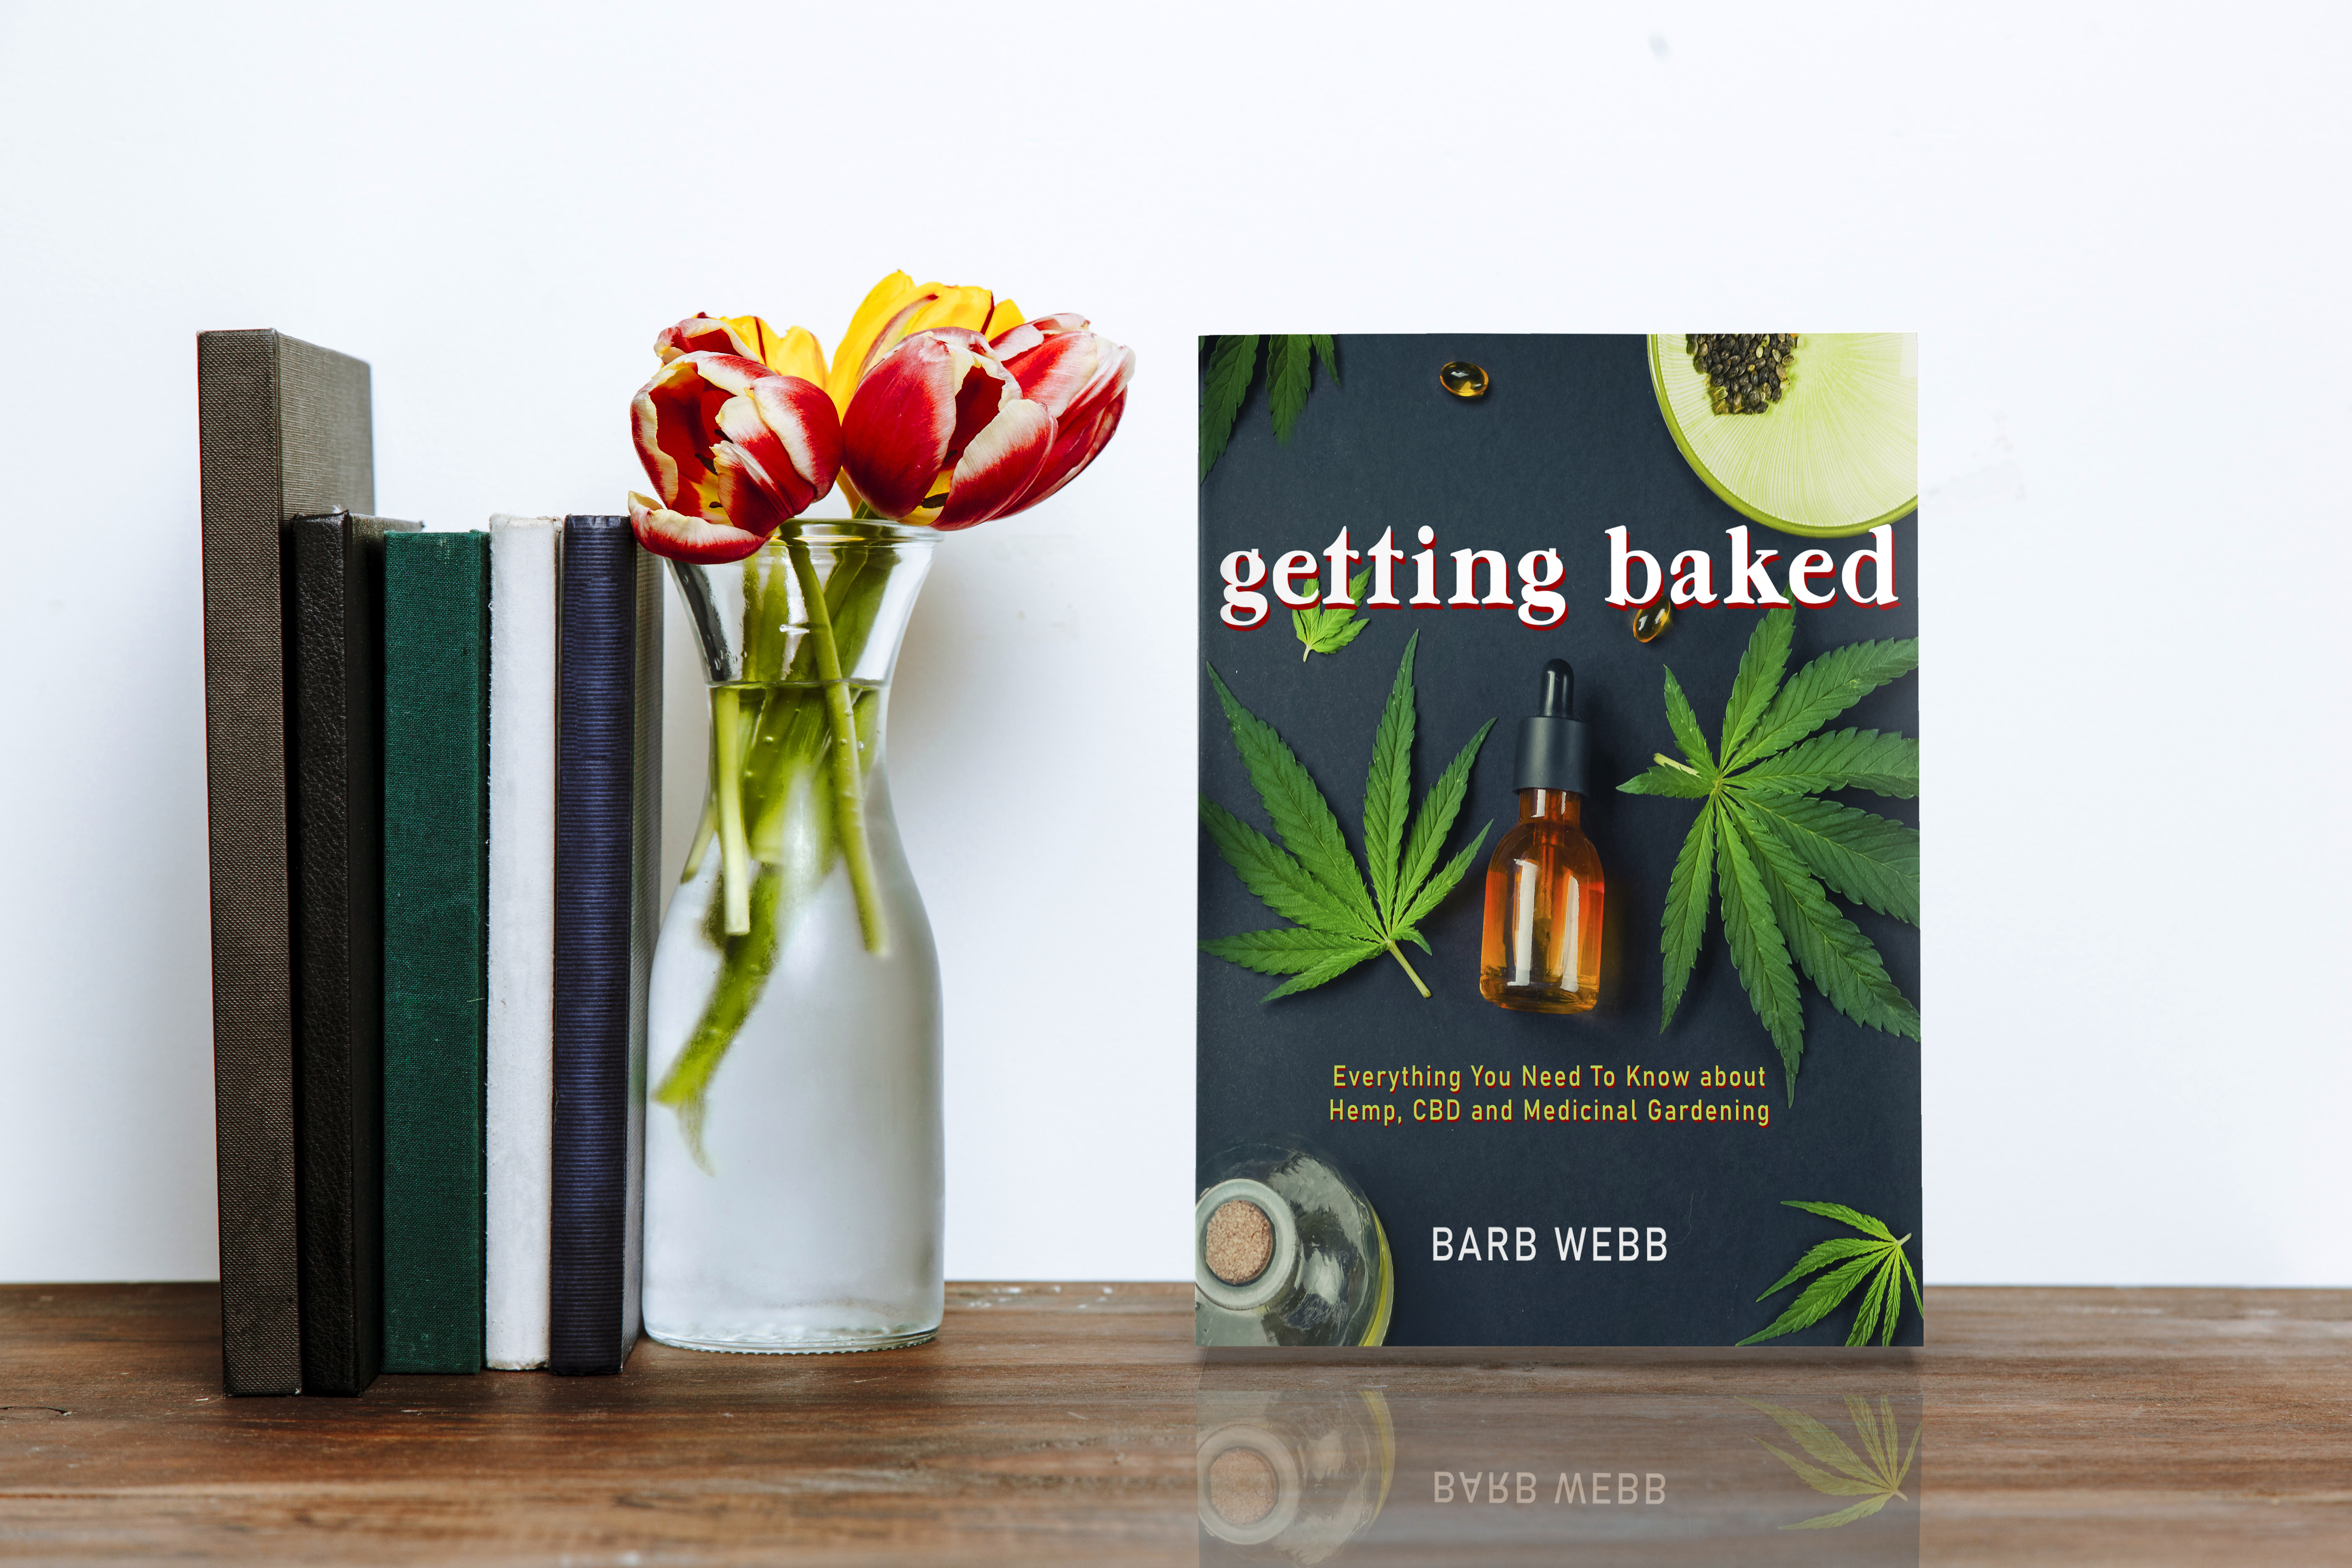 Getting Baked Everything You Need to Know About Hemp, CBD, and Medicinal Gardening